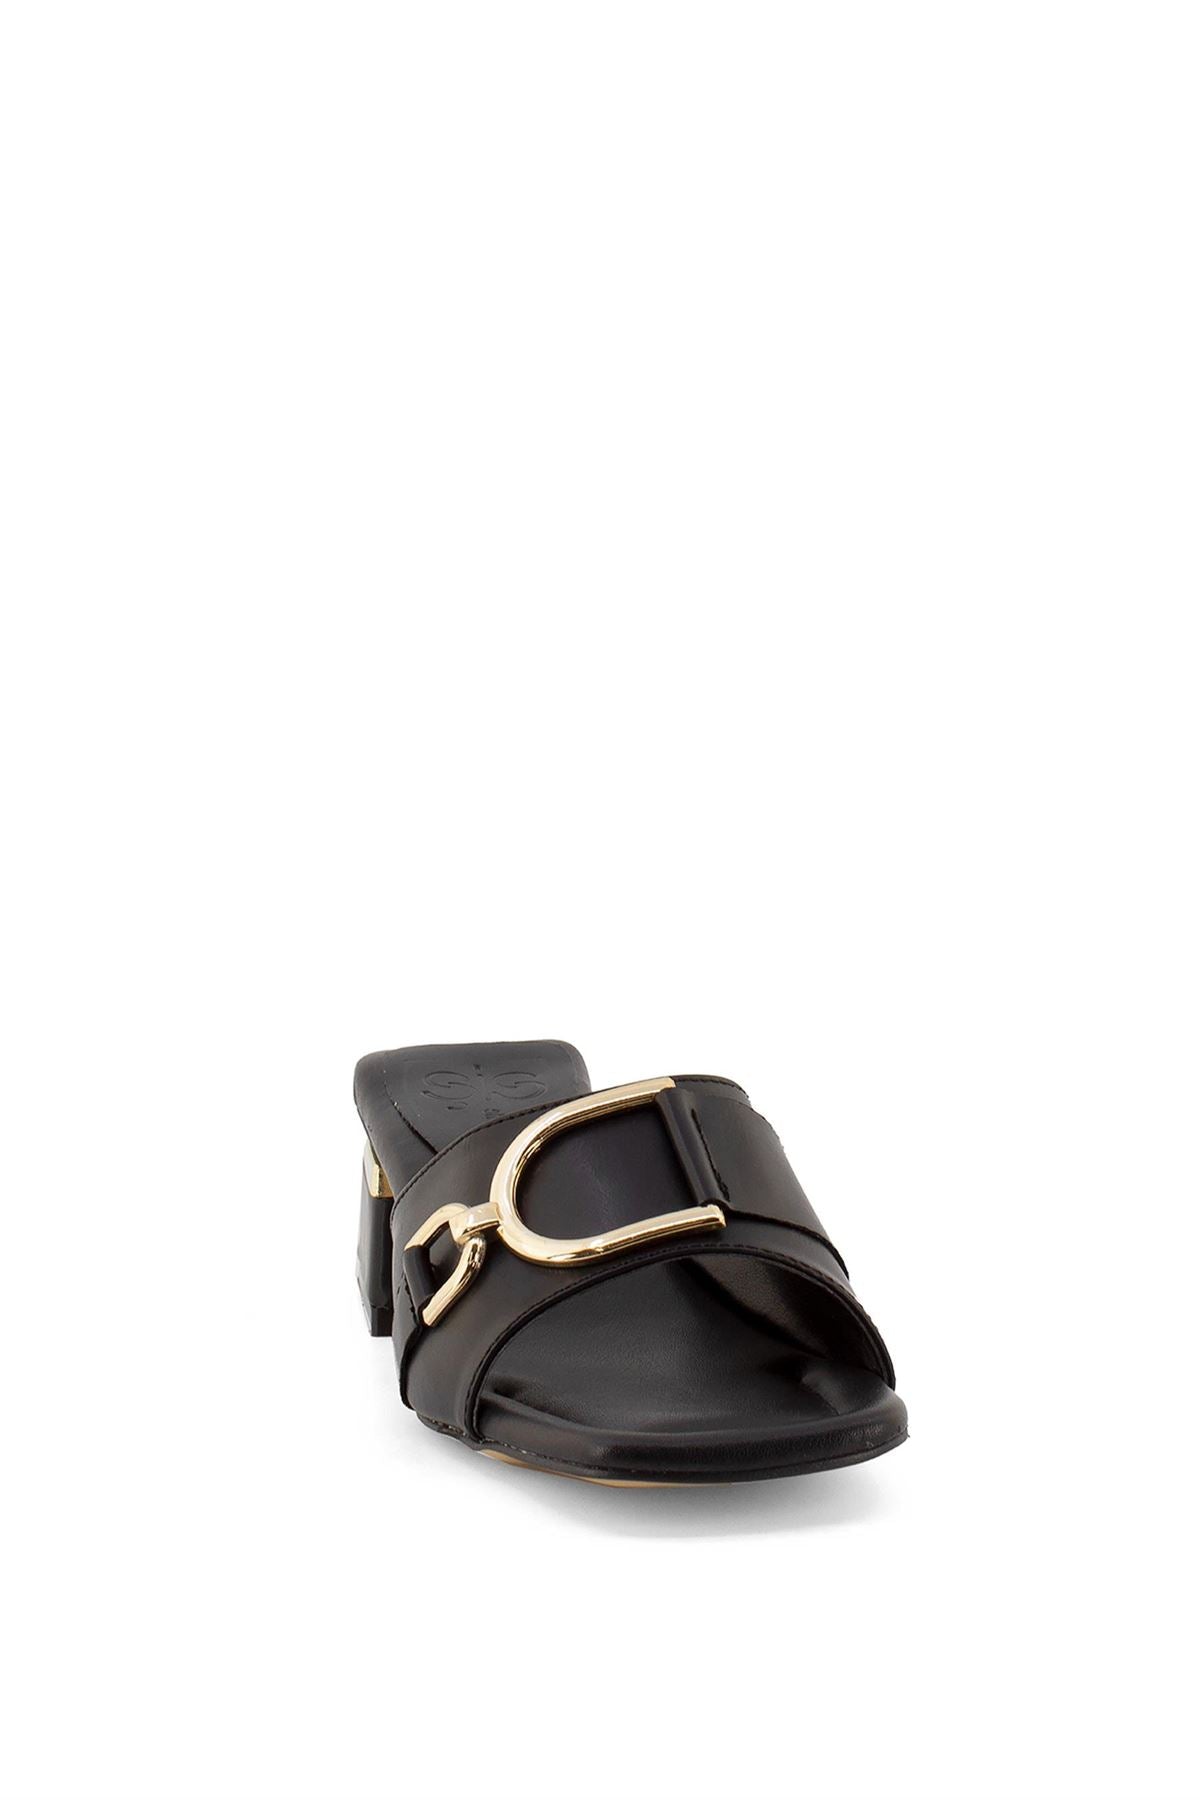 Women's black slippers with buckle detail - STREETMODE ™